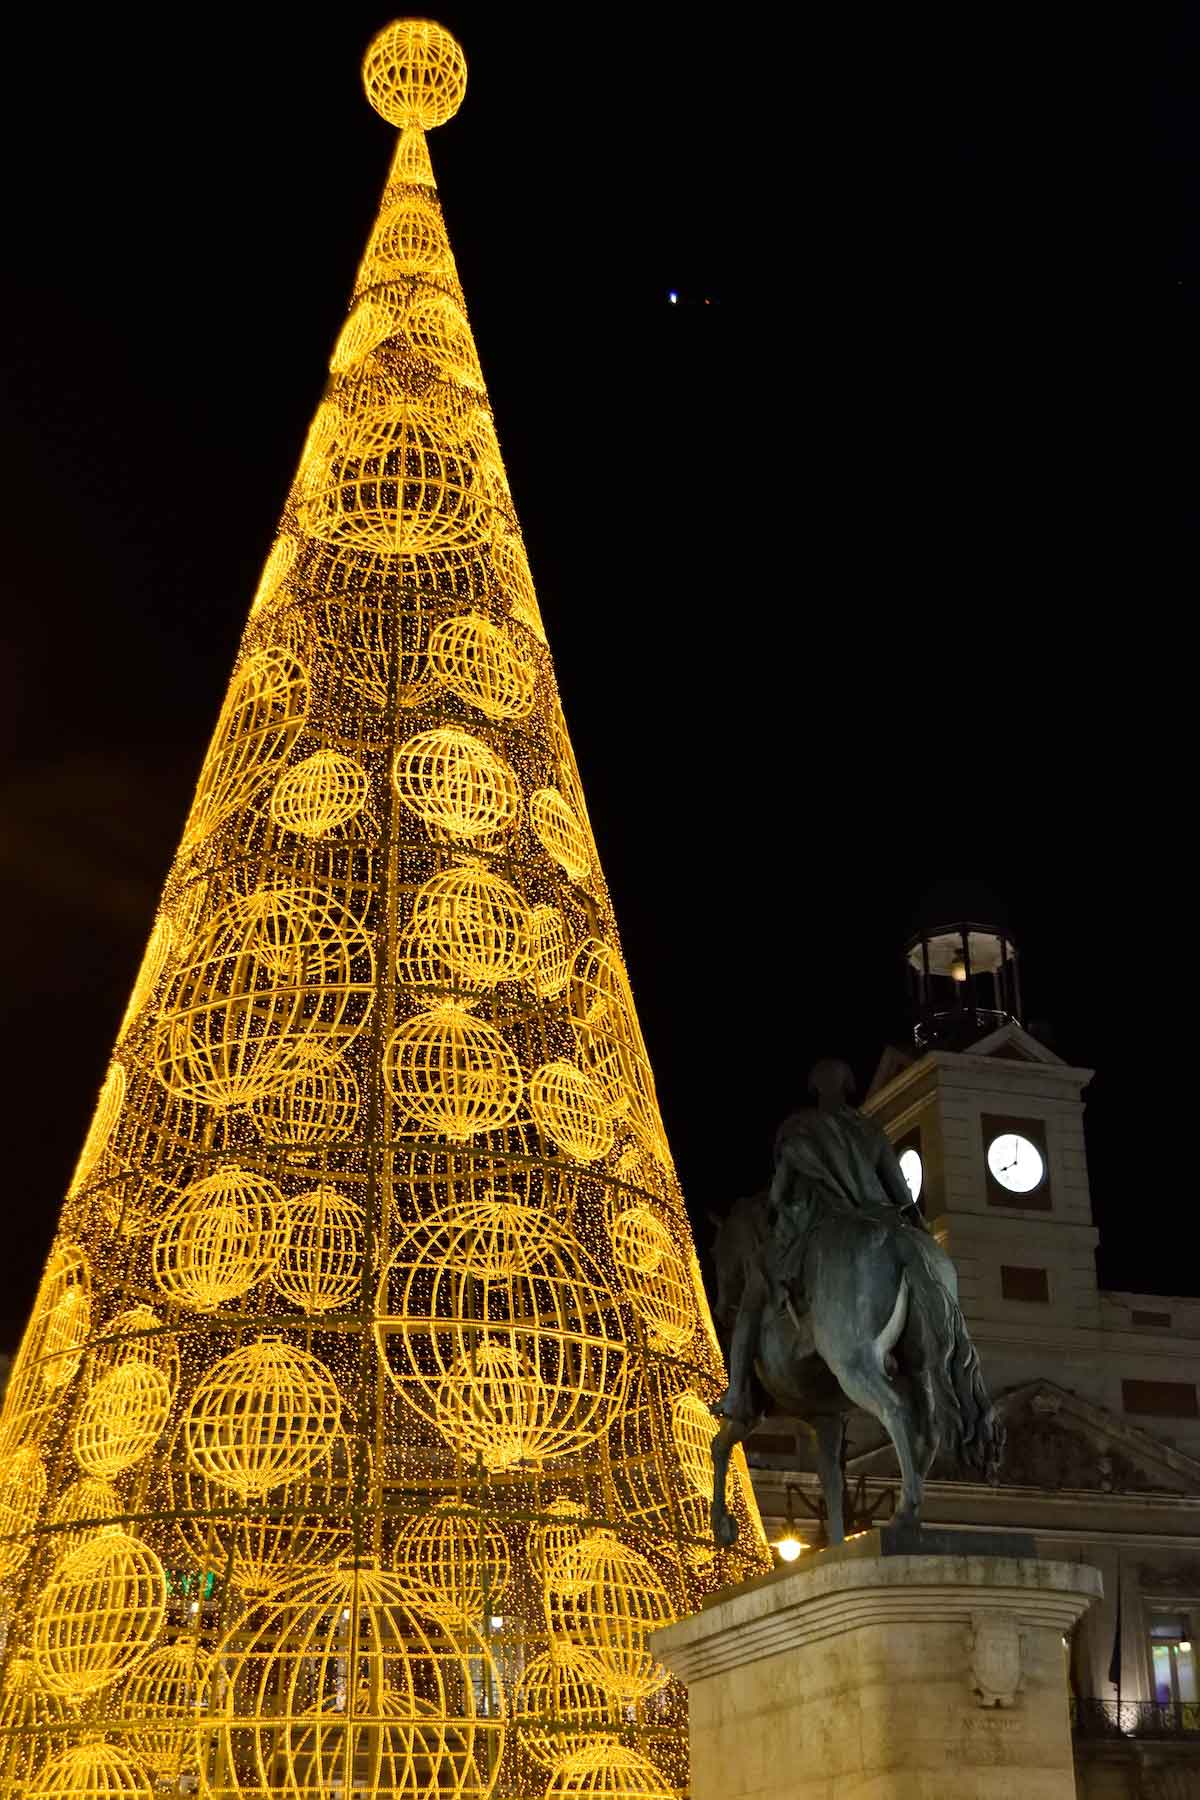 Large outdoor Christmas tree decorated with yellow lights illuminated at night, with a building with a clock tower visible in the background.